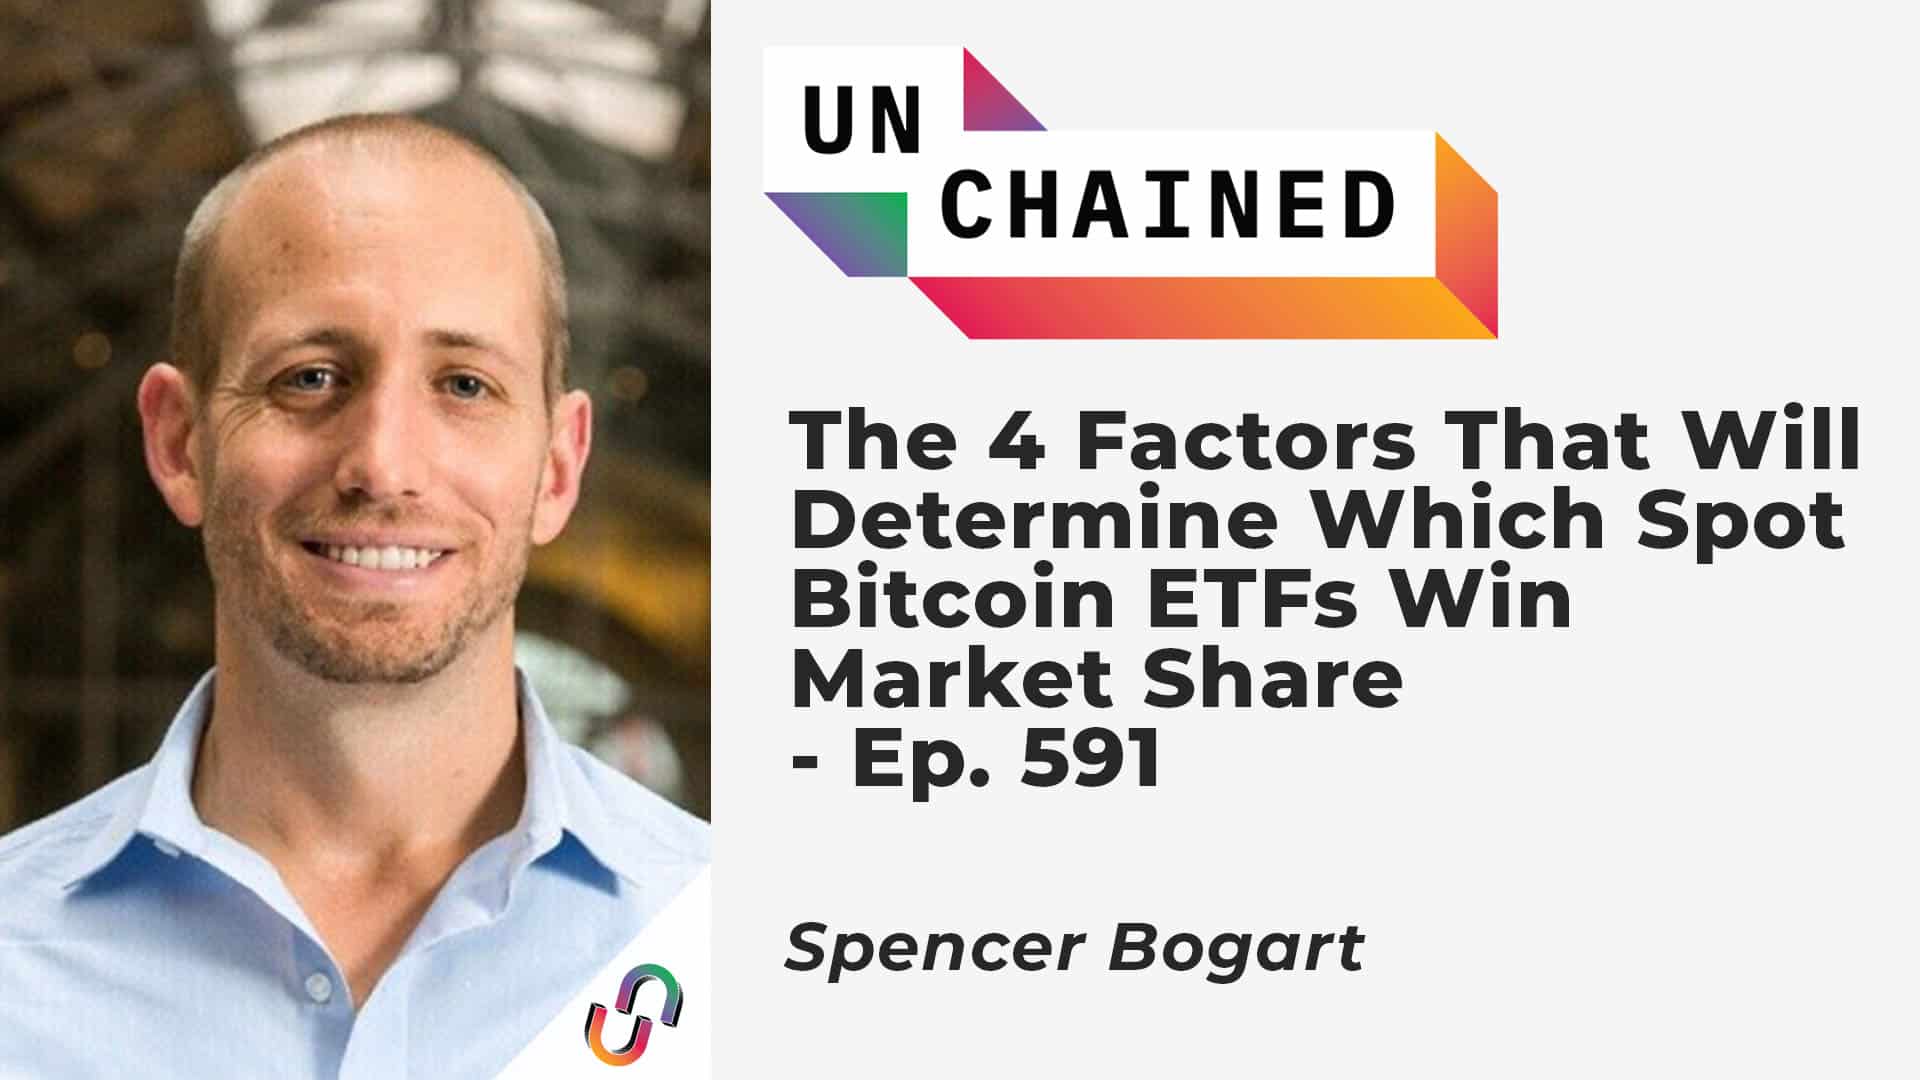 The 4 Factors That Will Determine Which Spot Bitcoin ETFs Win Market Share - Ep. 591